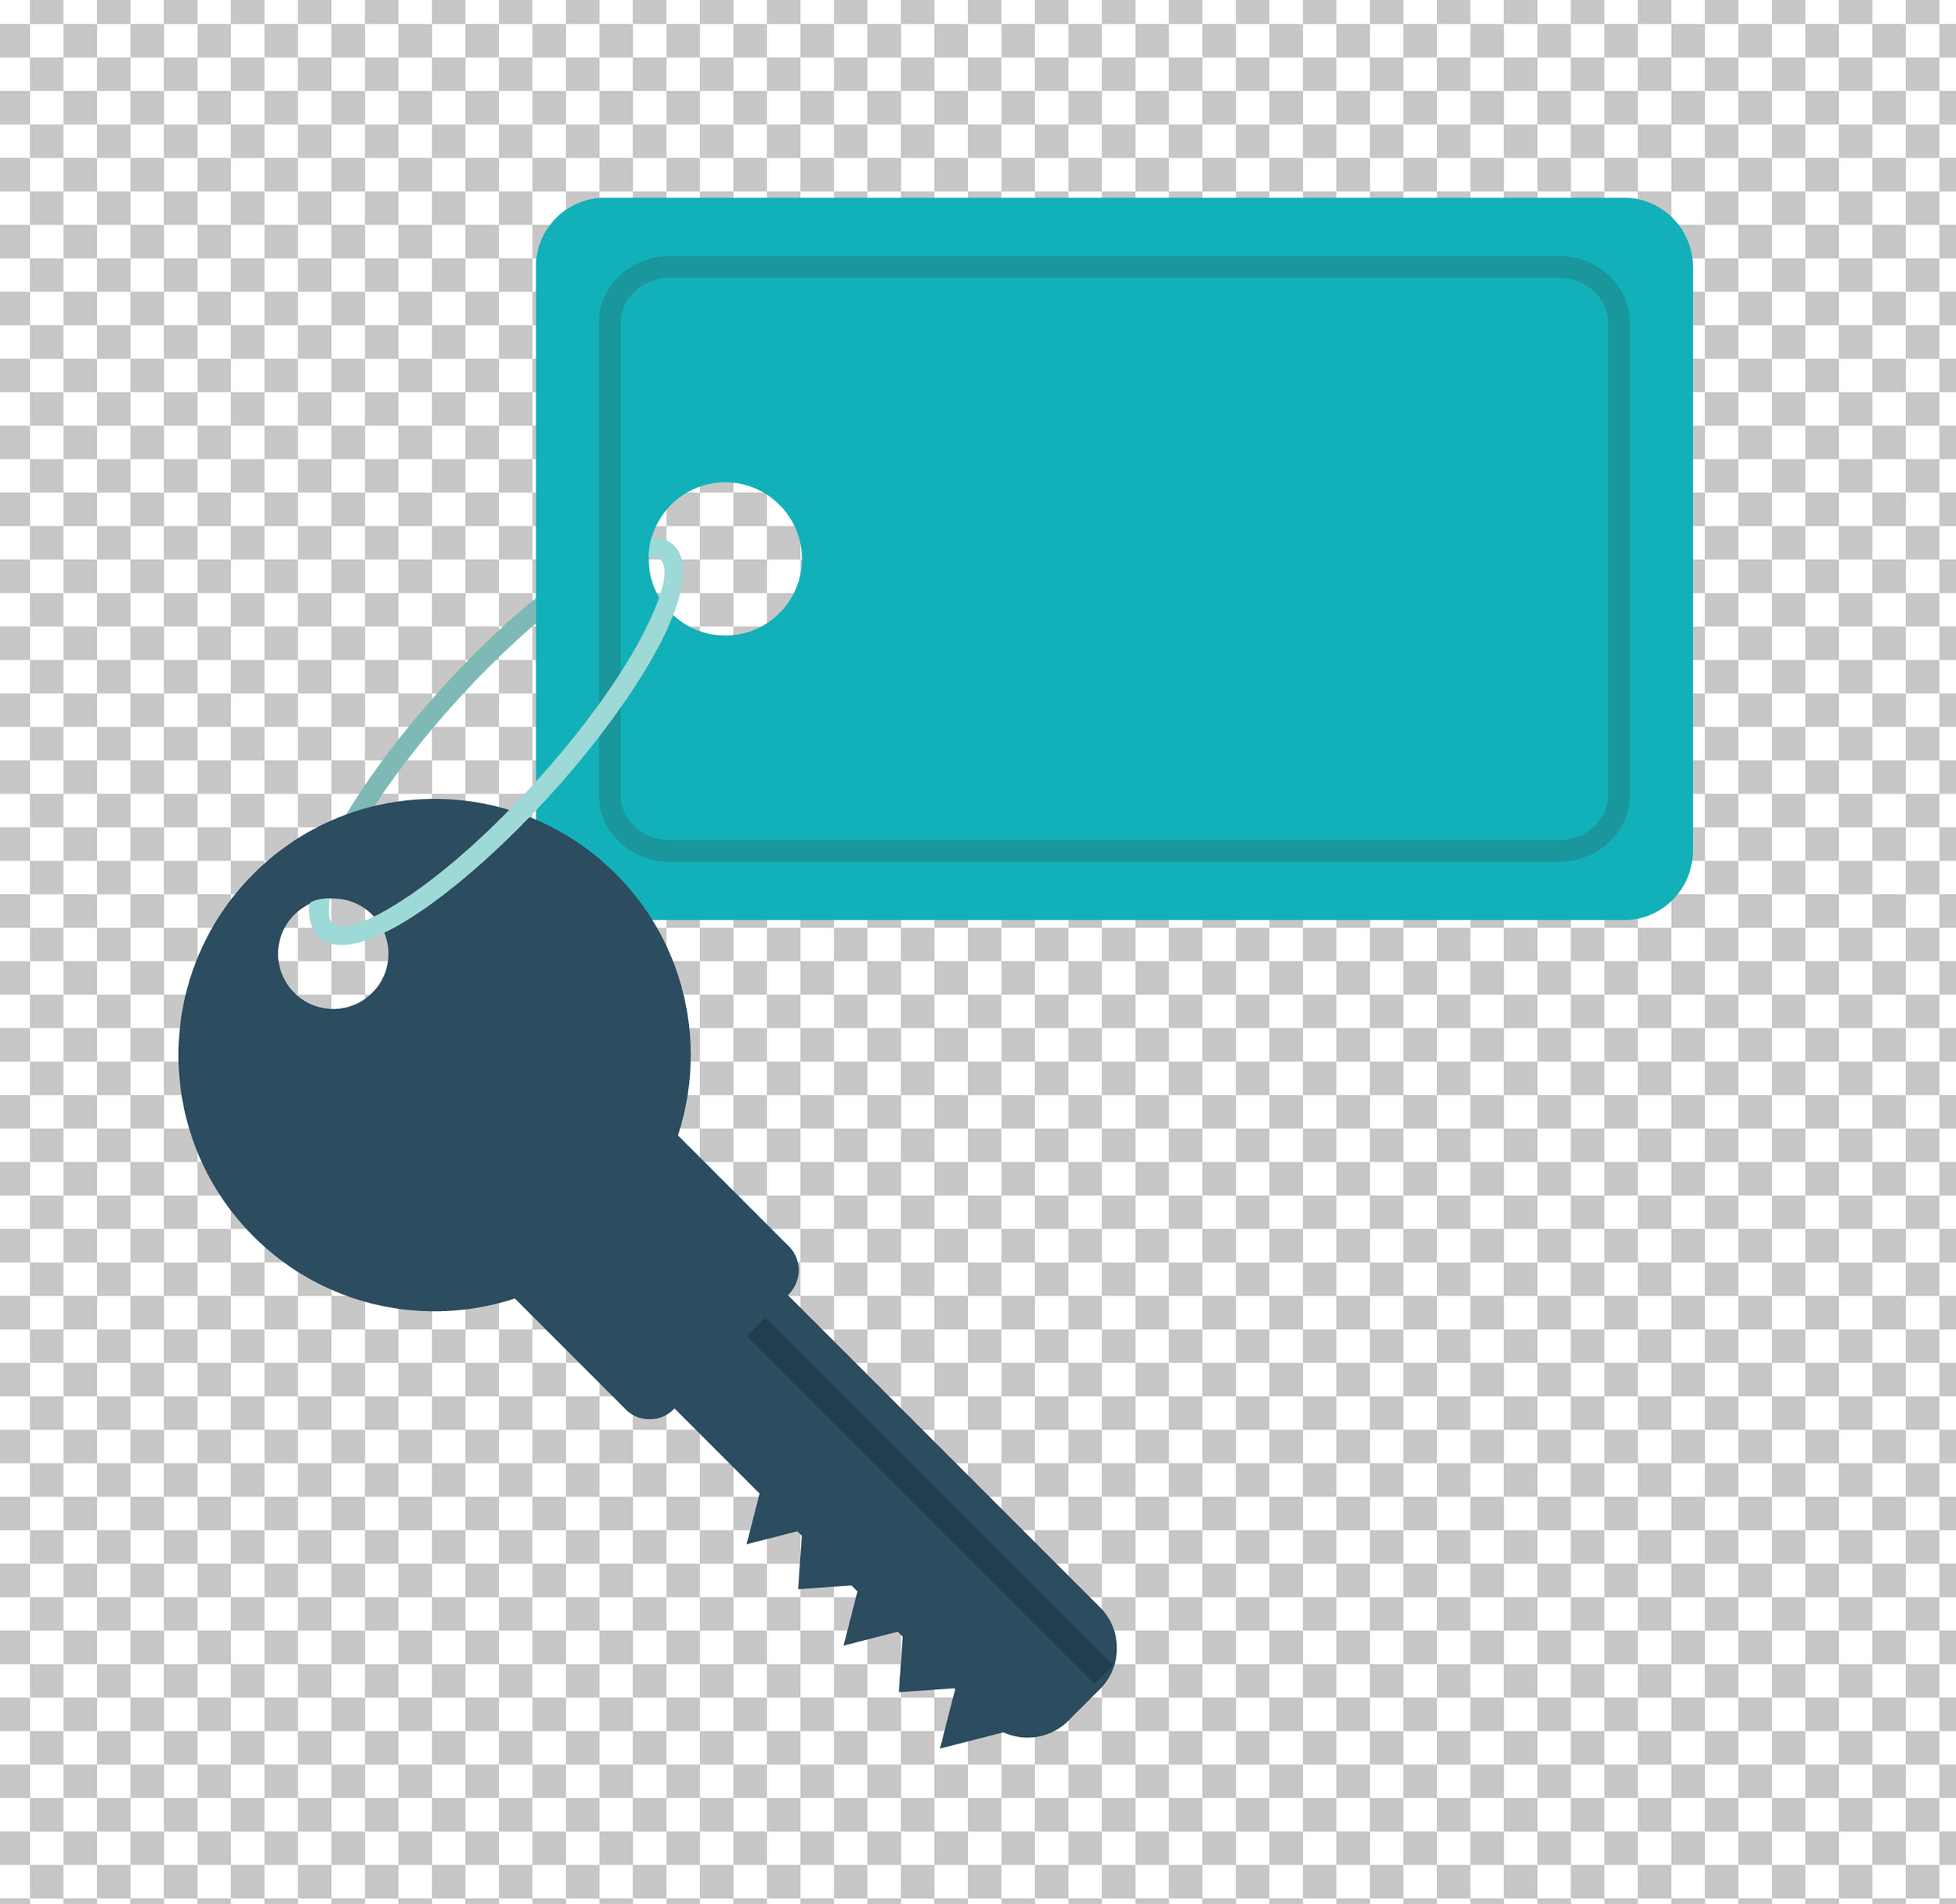 House Key with Blue Tag with transparent image